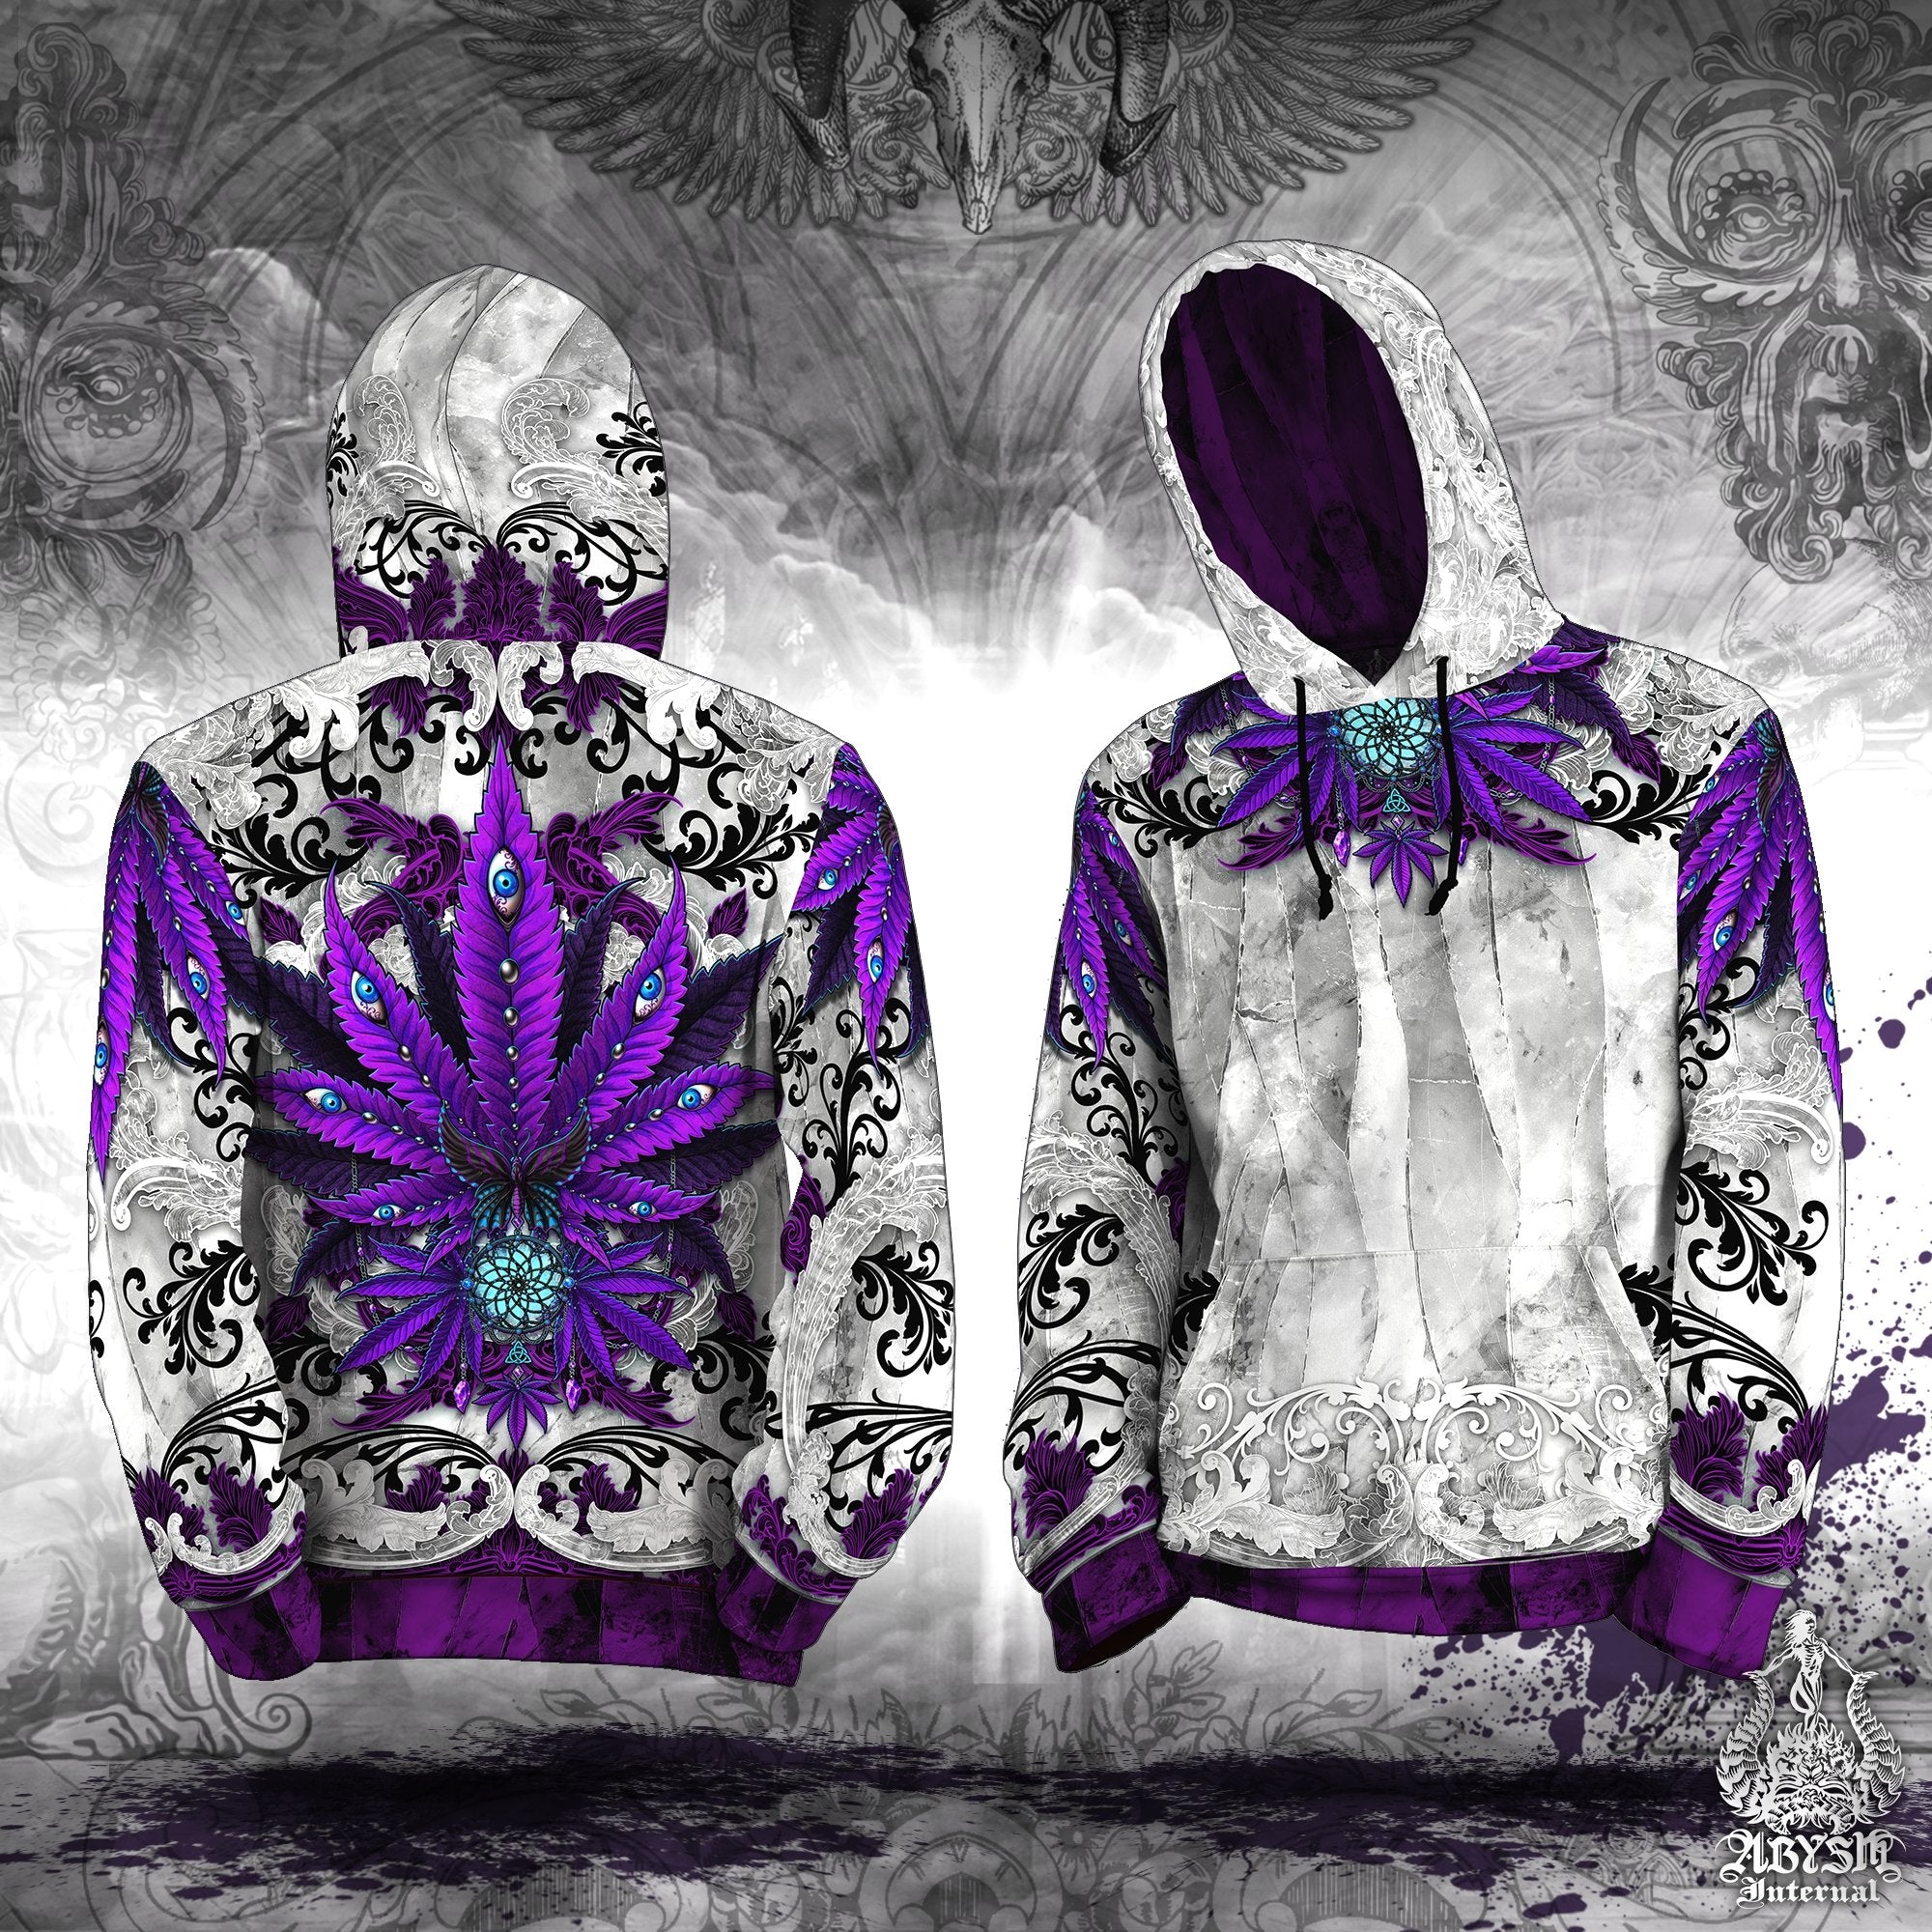 Weed Hoodie, Cannabis Sweater, Gothic Festival Outfit, White Goth Streetwear, Indie and Alternative Clothing, Unisex, 420 Gift - Purple Marijuana - Abysm Internal